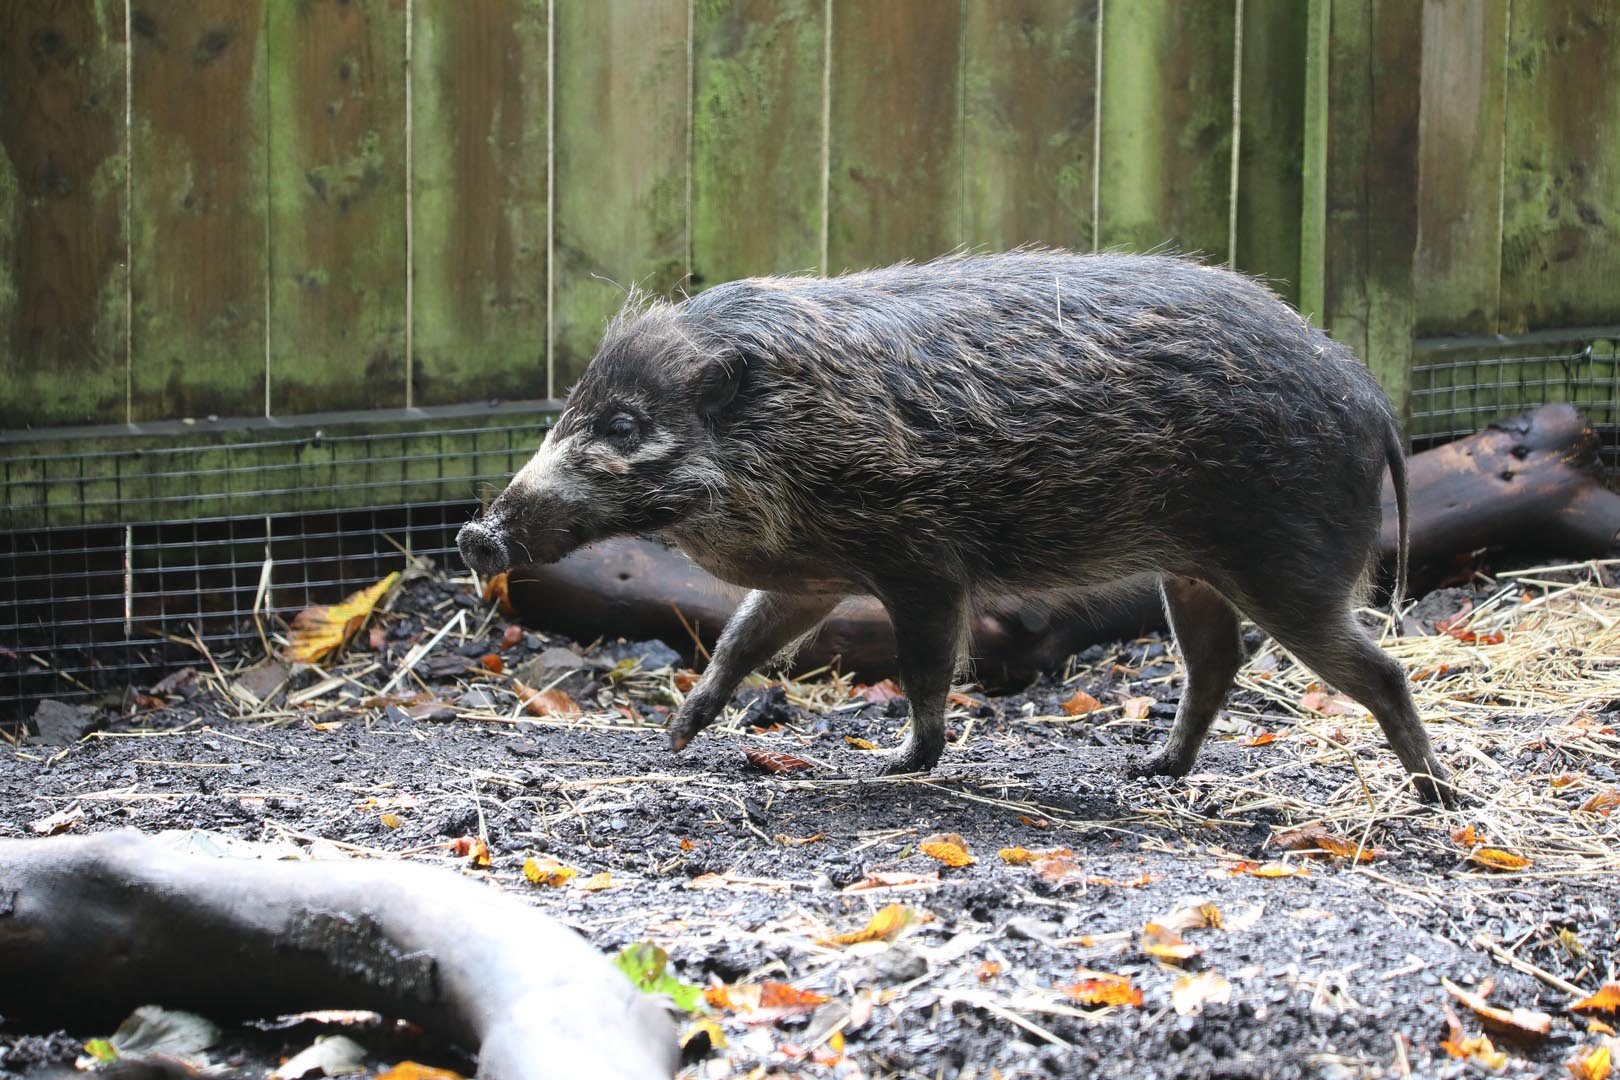 Visayan warty pig running with fence behind Image: AMY MIDDLETON 2023